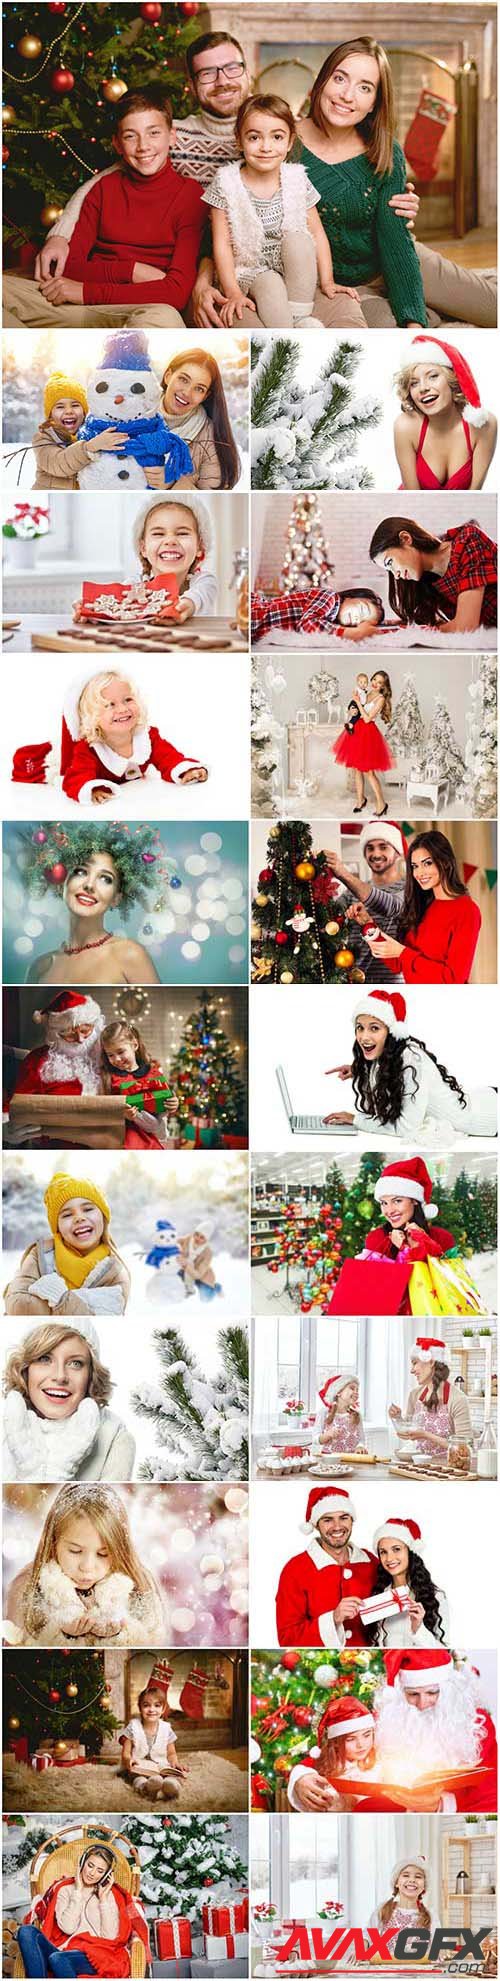 New Year and Christmas stock photos 88